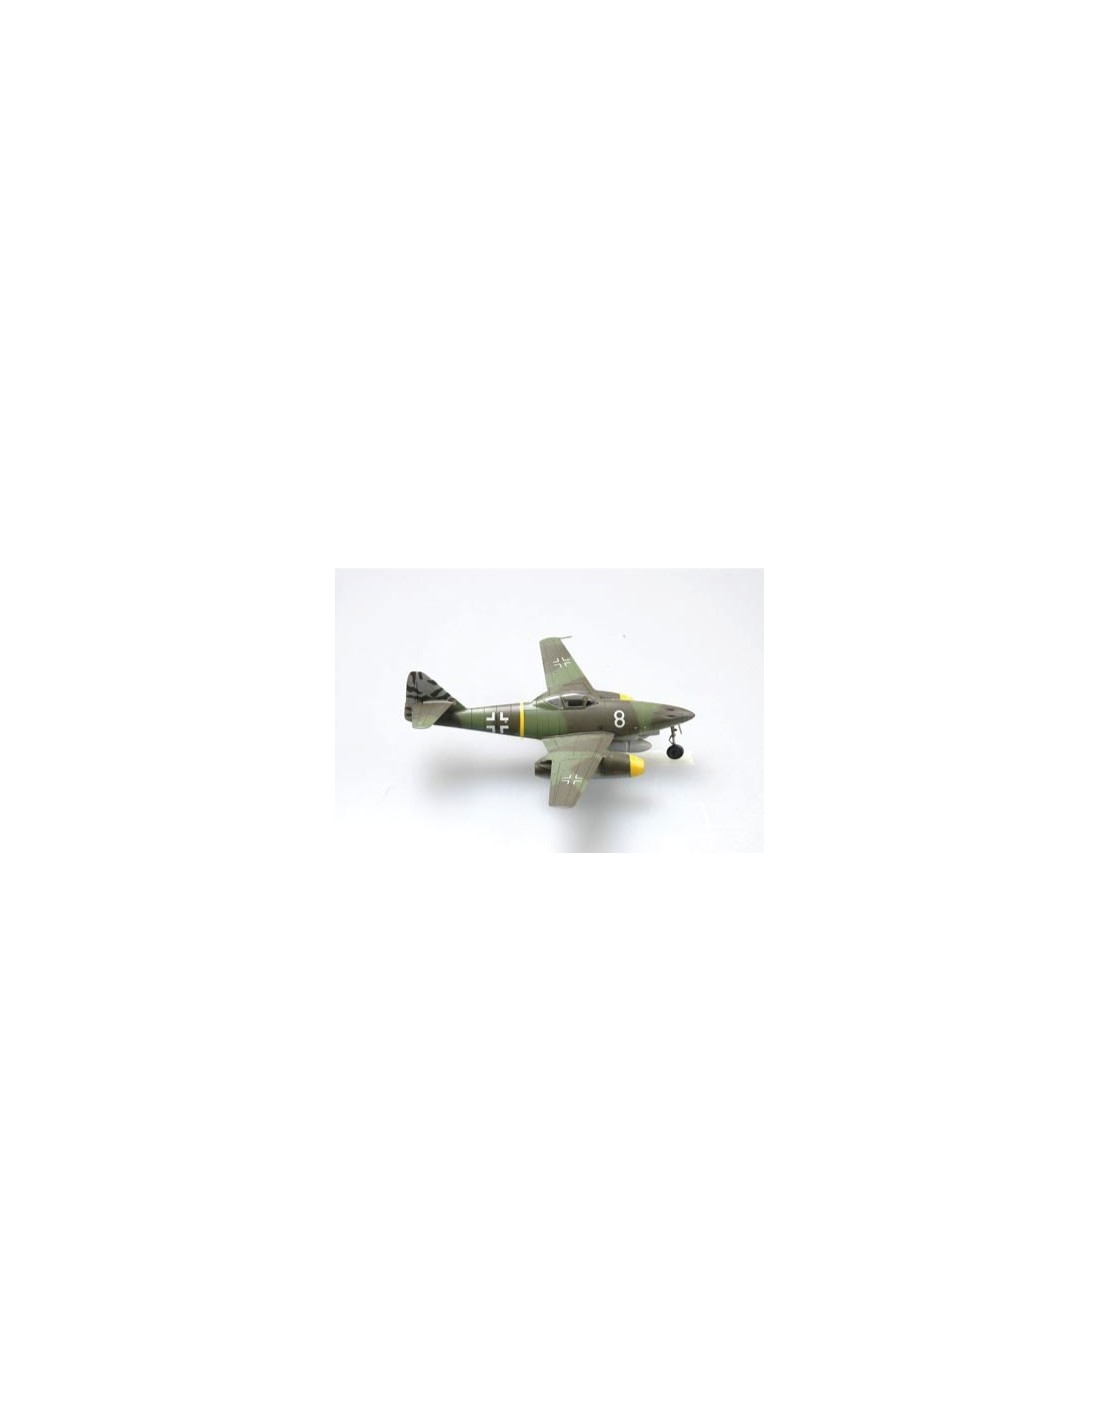 HobbyBoss 80249 1/72 Me262 A-1a Fighter Plastic Aircraft Assembly Model Kits